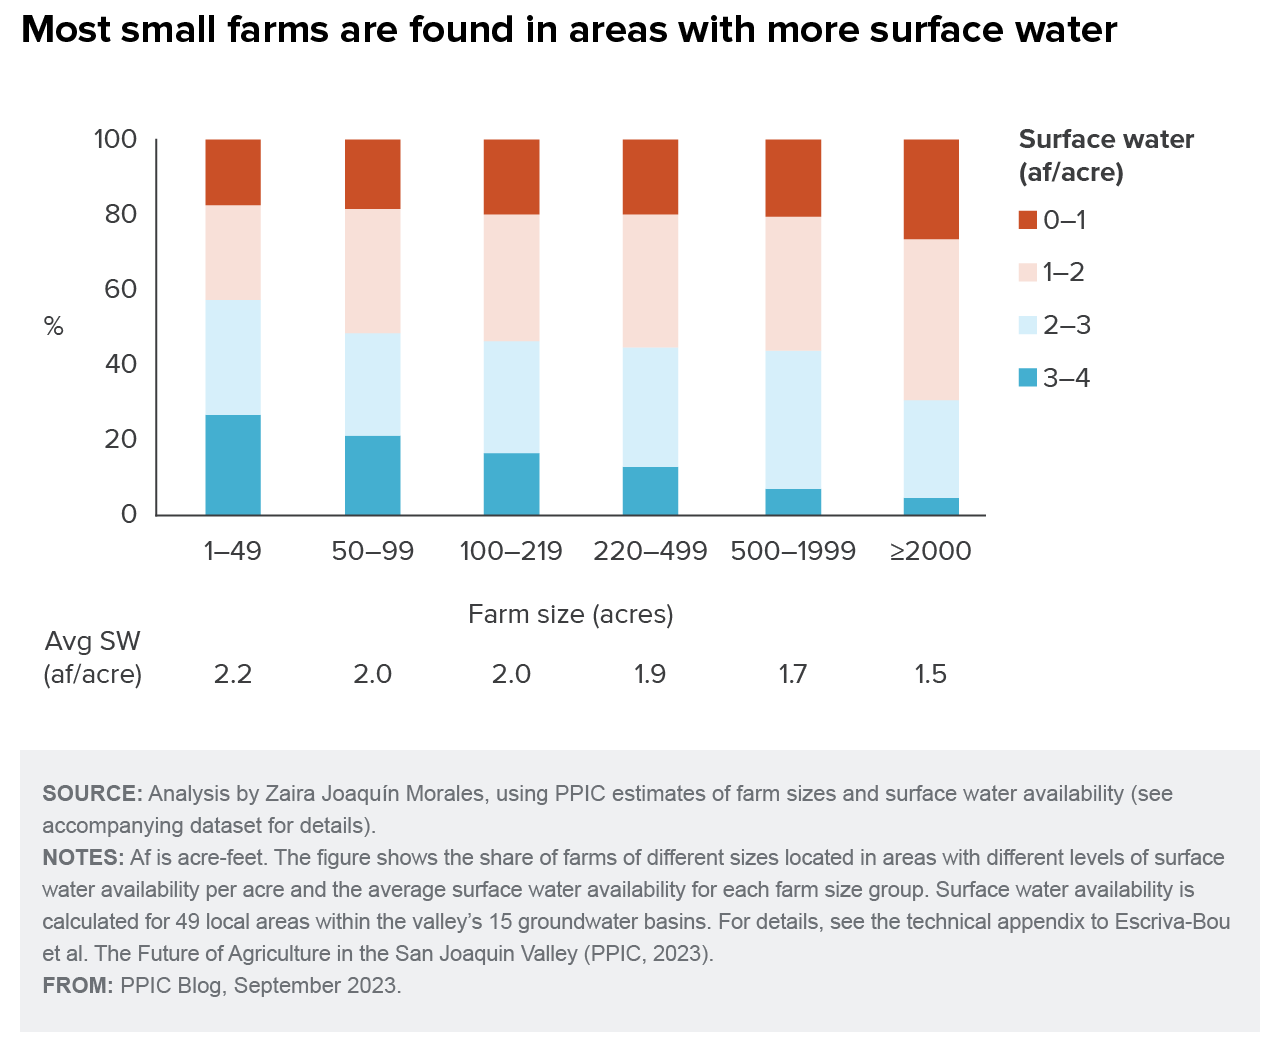 figure - Most small farms are found in areas with more surface water